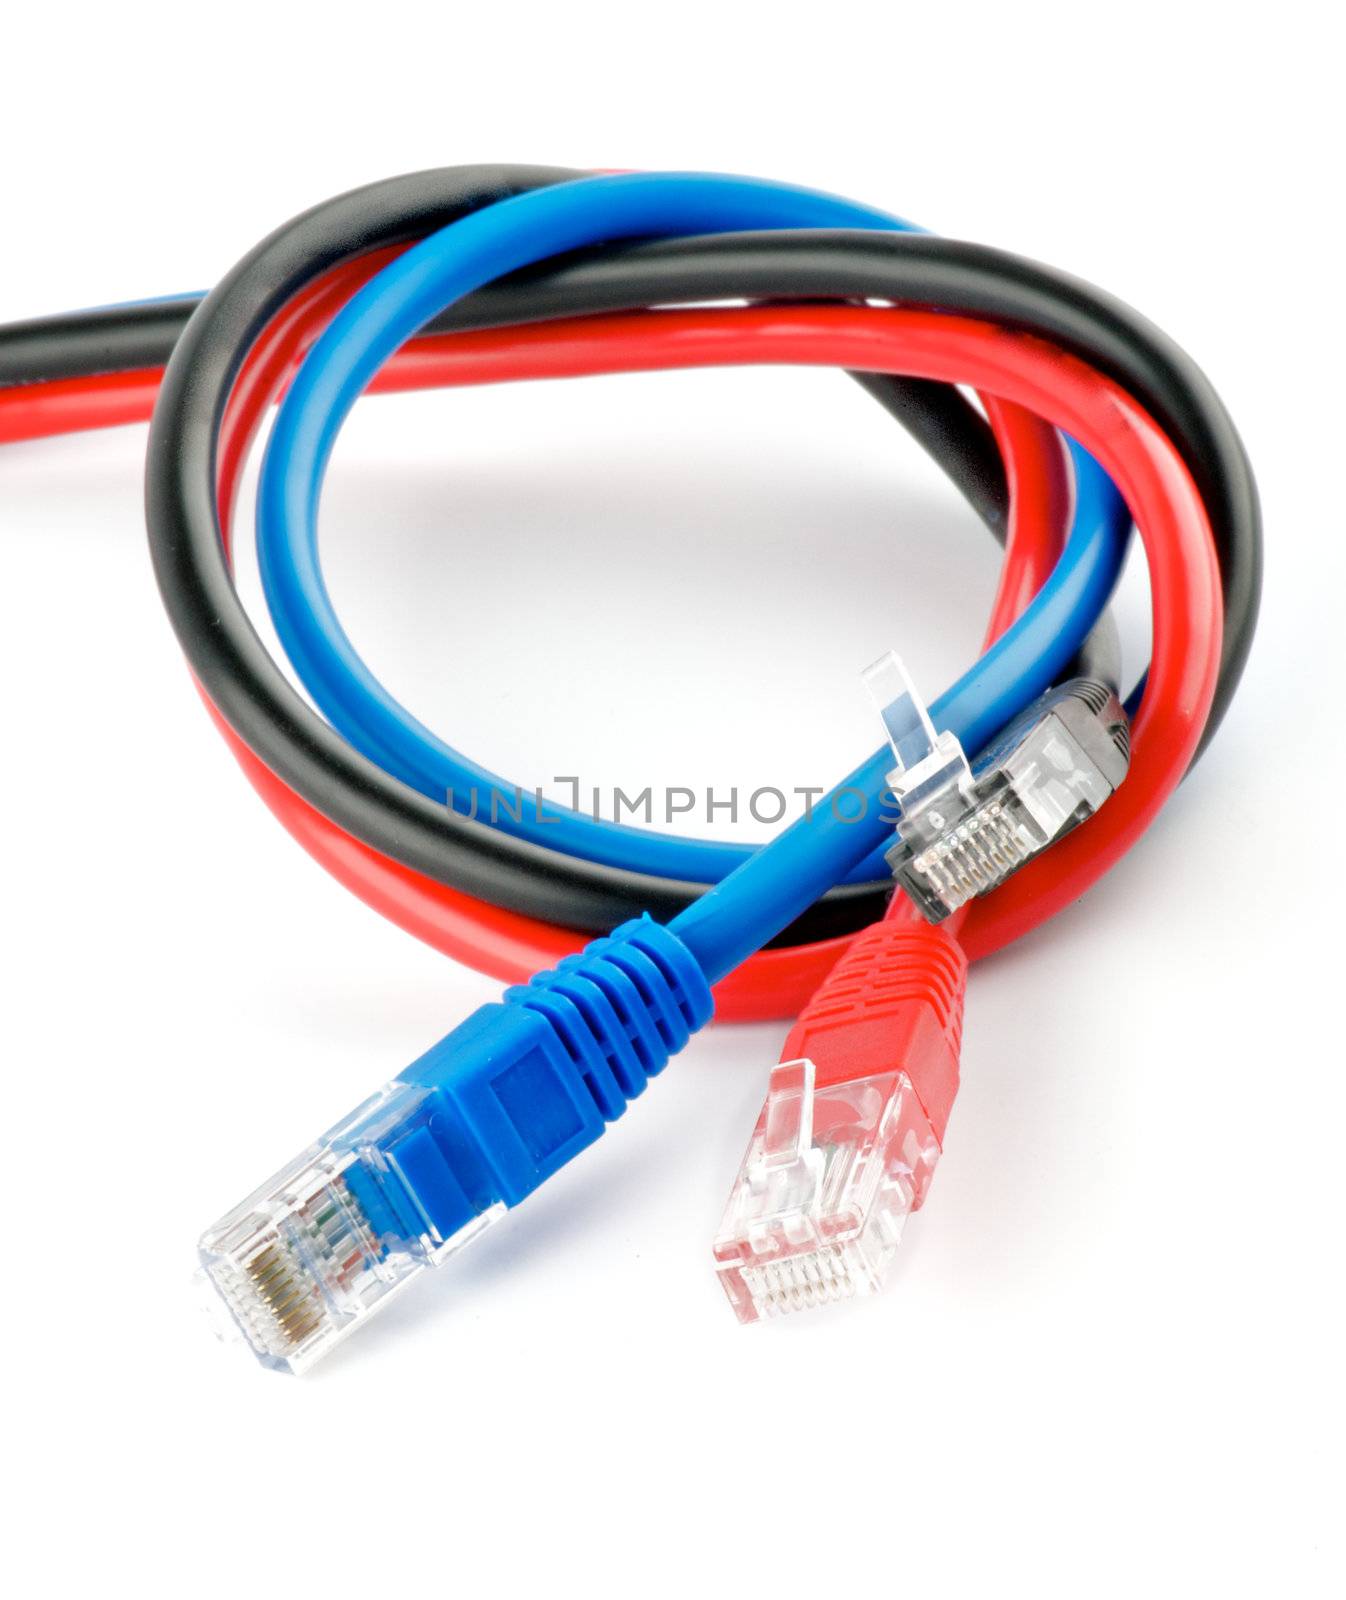 Black, red and blue UTP cords with RJ-45 Connectors by zhekos